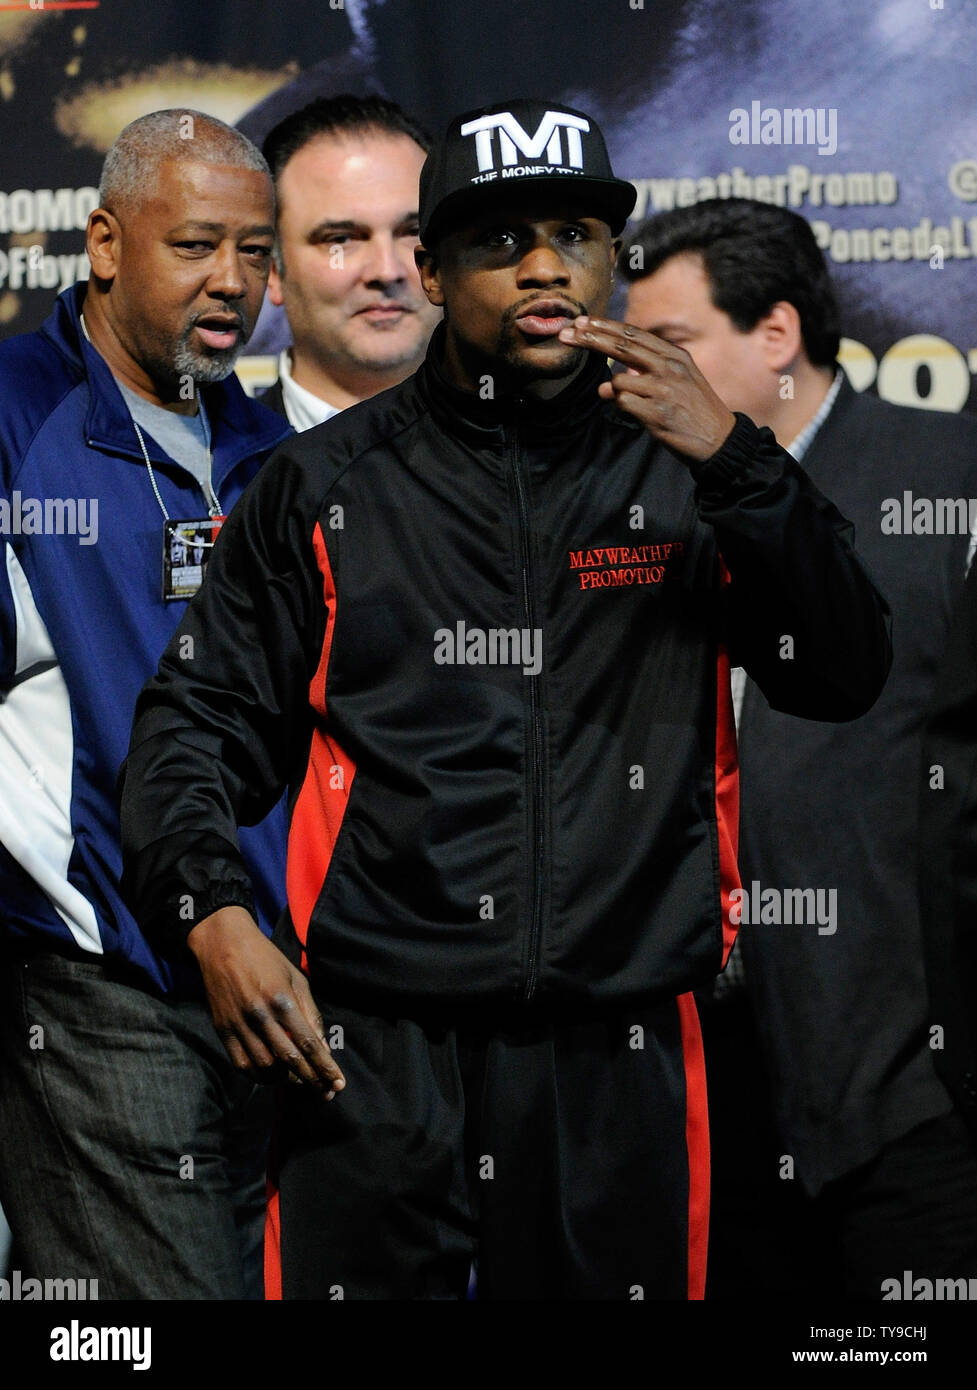 Boxer Floyd Mayweather arrives to weigh-in before his fight against Robert Guerrero for the WBC and Vacant Ring Magazine Welterweight titles at the MGM Grand Garden Arena in Las Vegas, Nevada on May 3, 2013. UPI/David Becker Stock Photo